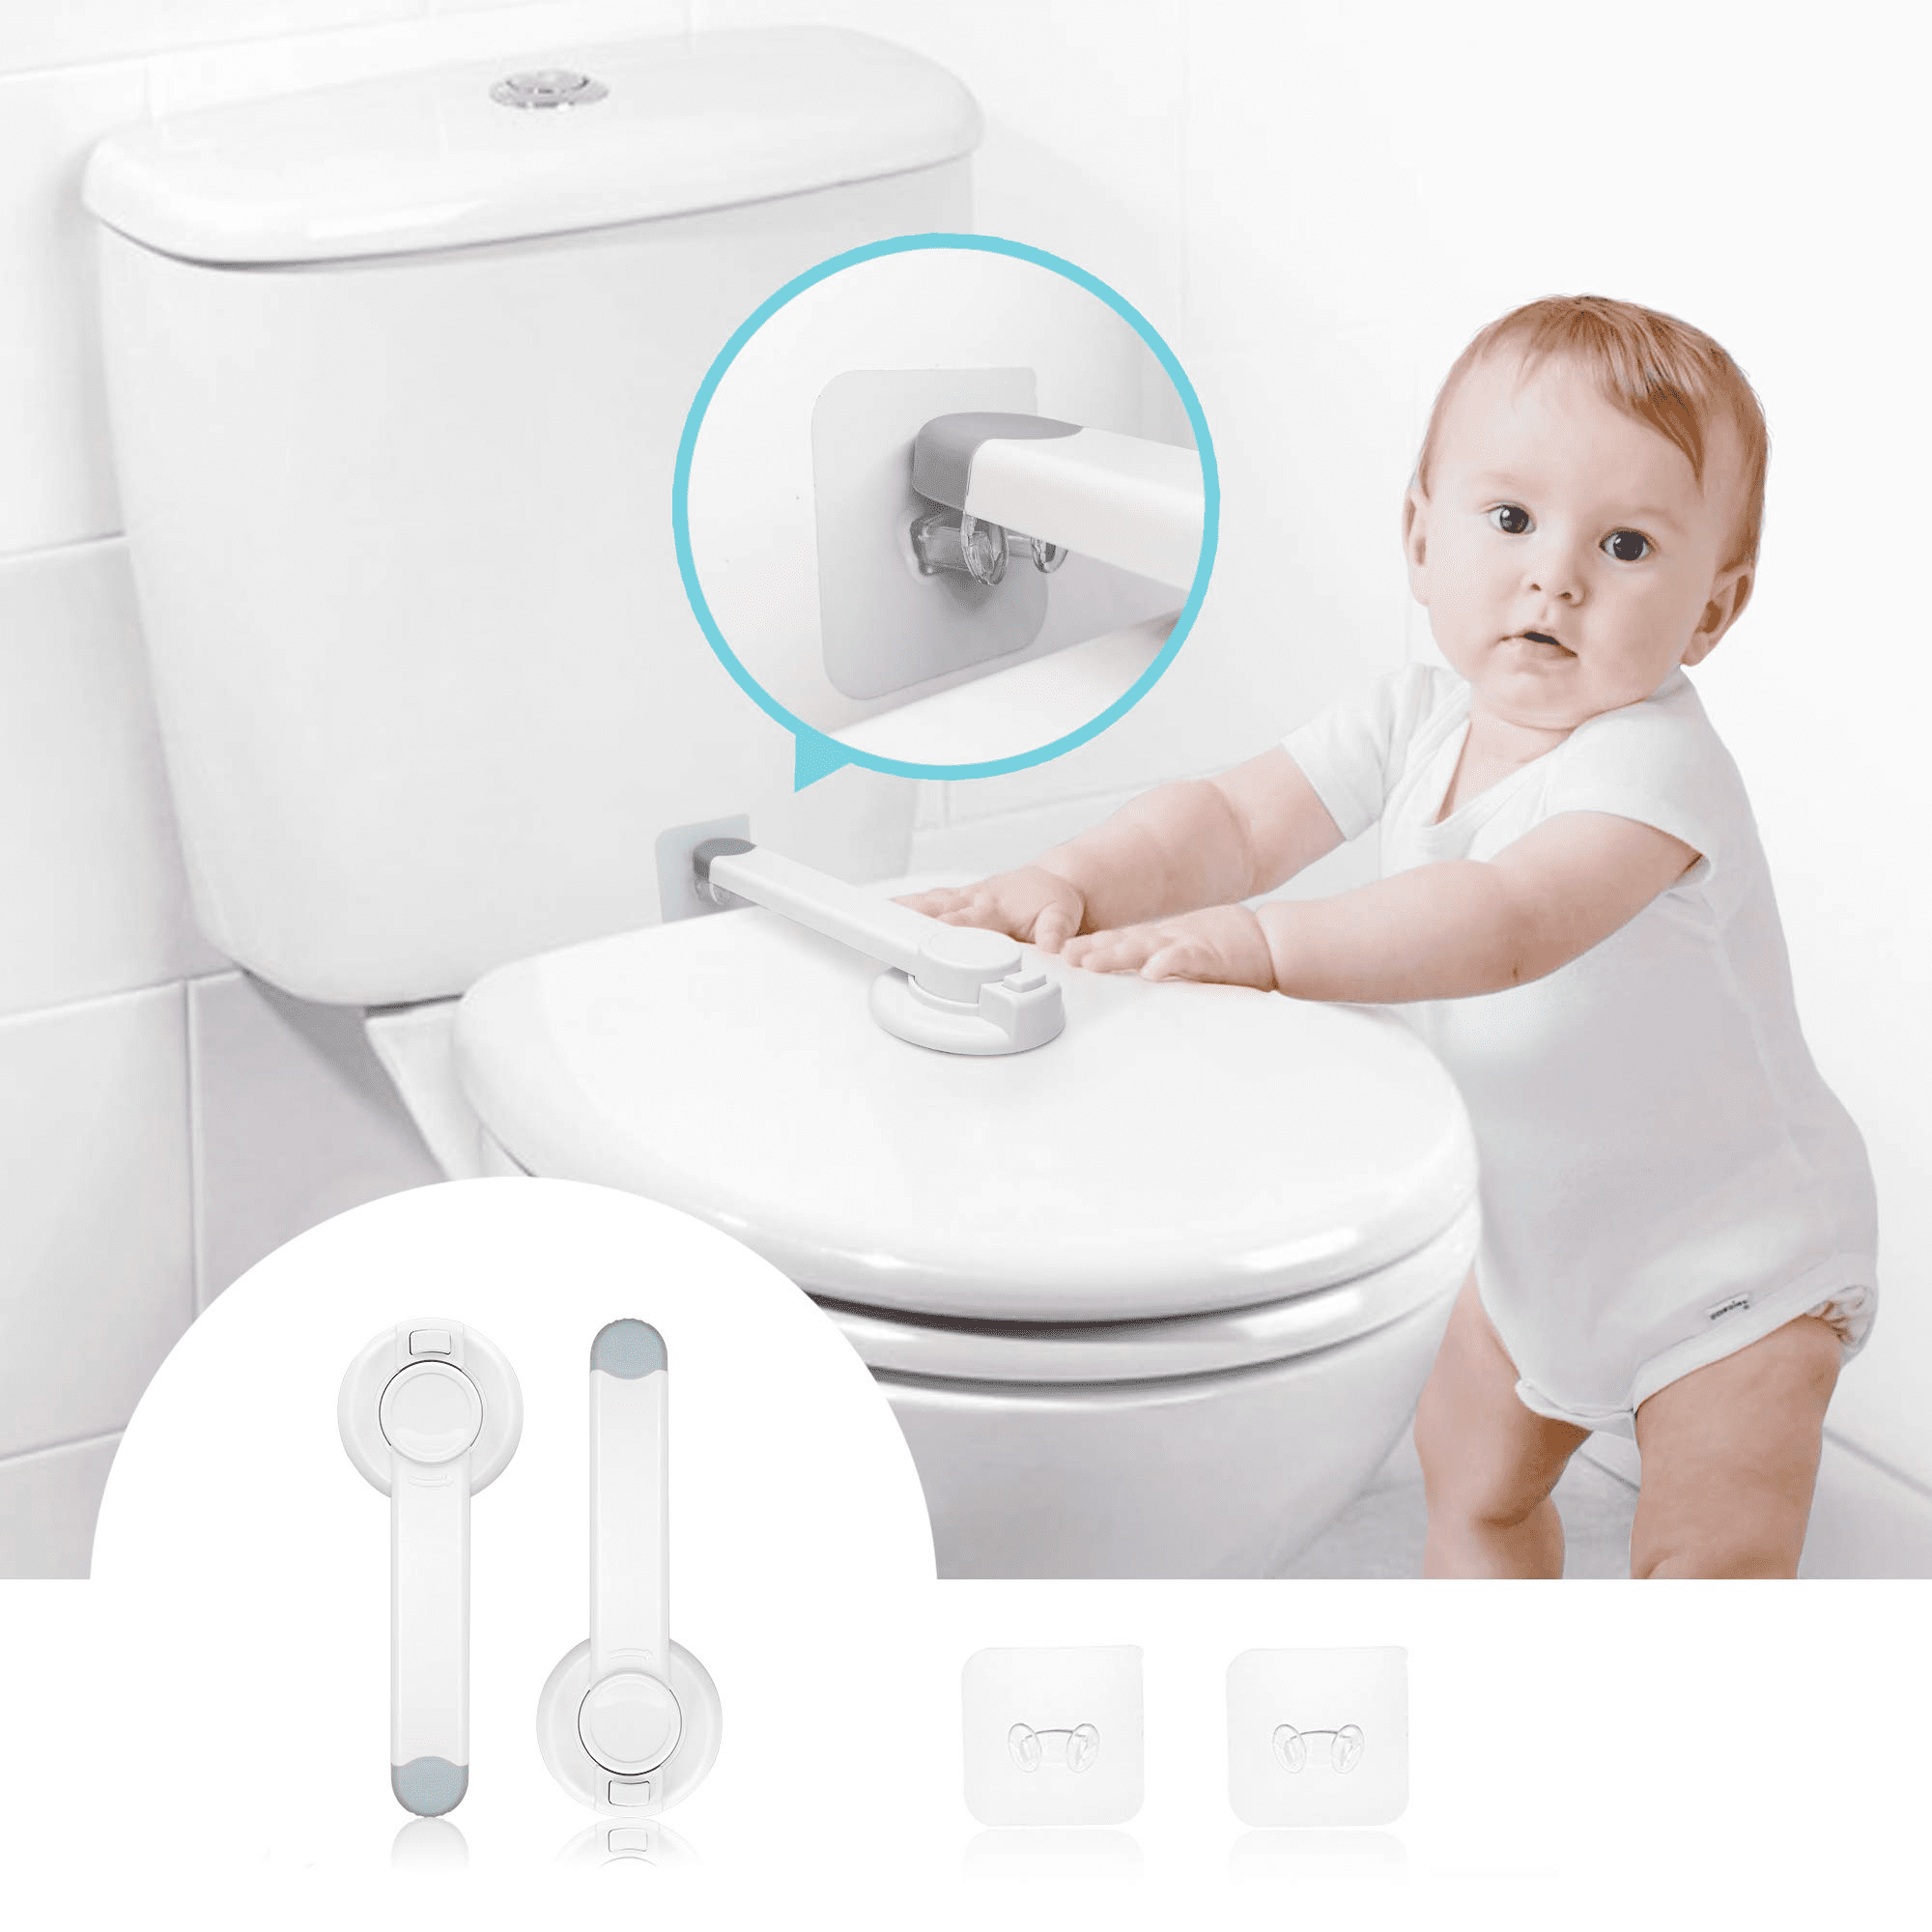 Baby Toilet Lock (1 Pack) Ideal Baby Proof Toilet Lid Lock with Arm – No  Tools Needed Easy Installation with 3M Adhesive – Top Safety Toilet Seat  Lock